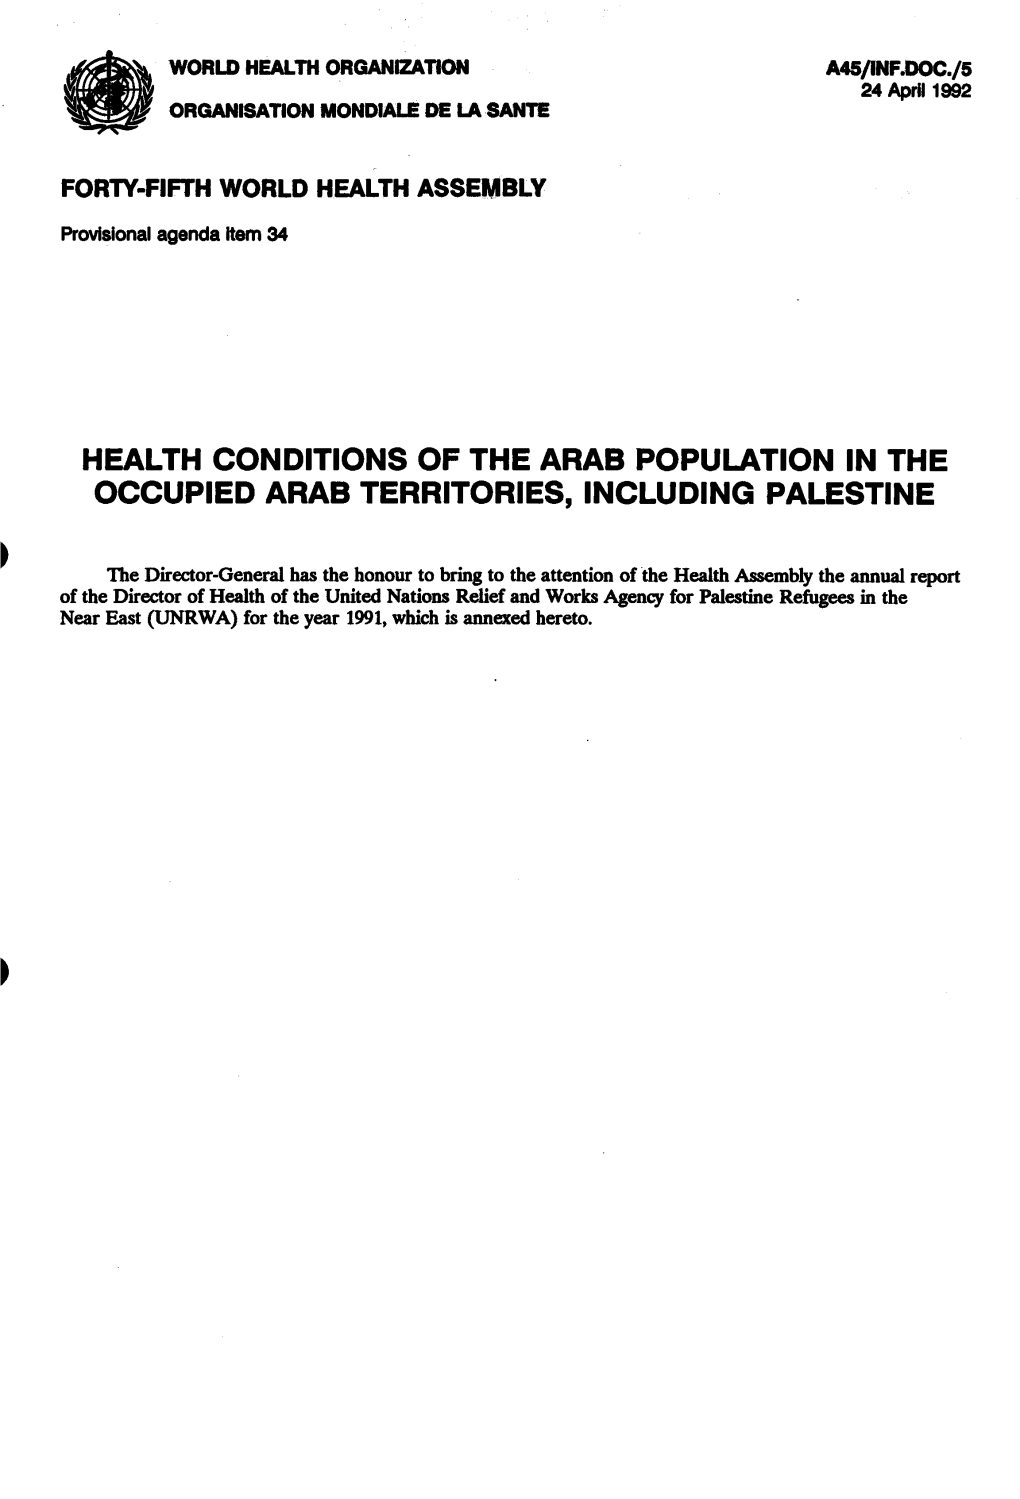 Health Conditions of the Arab Population in the Occupied Arab Territories, Including Palestine